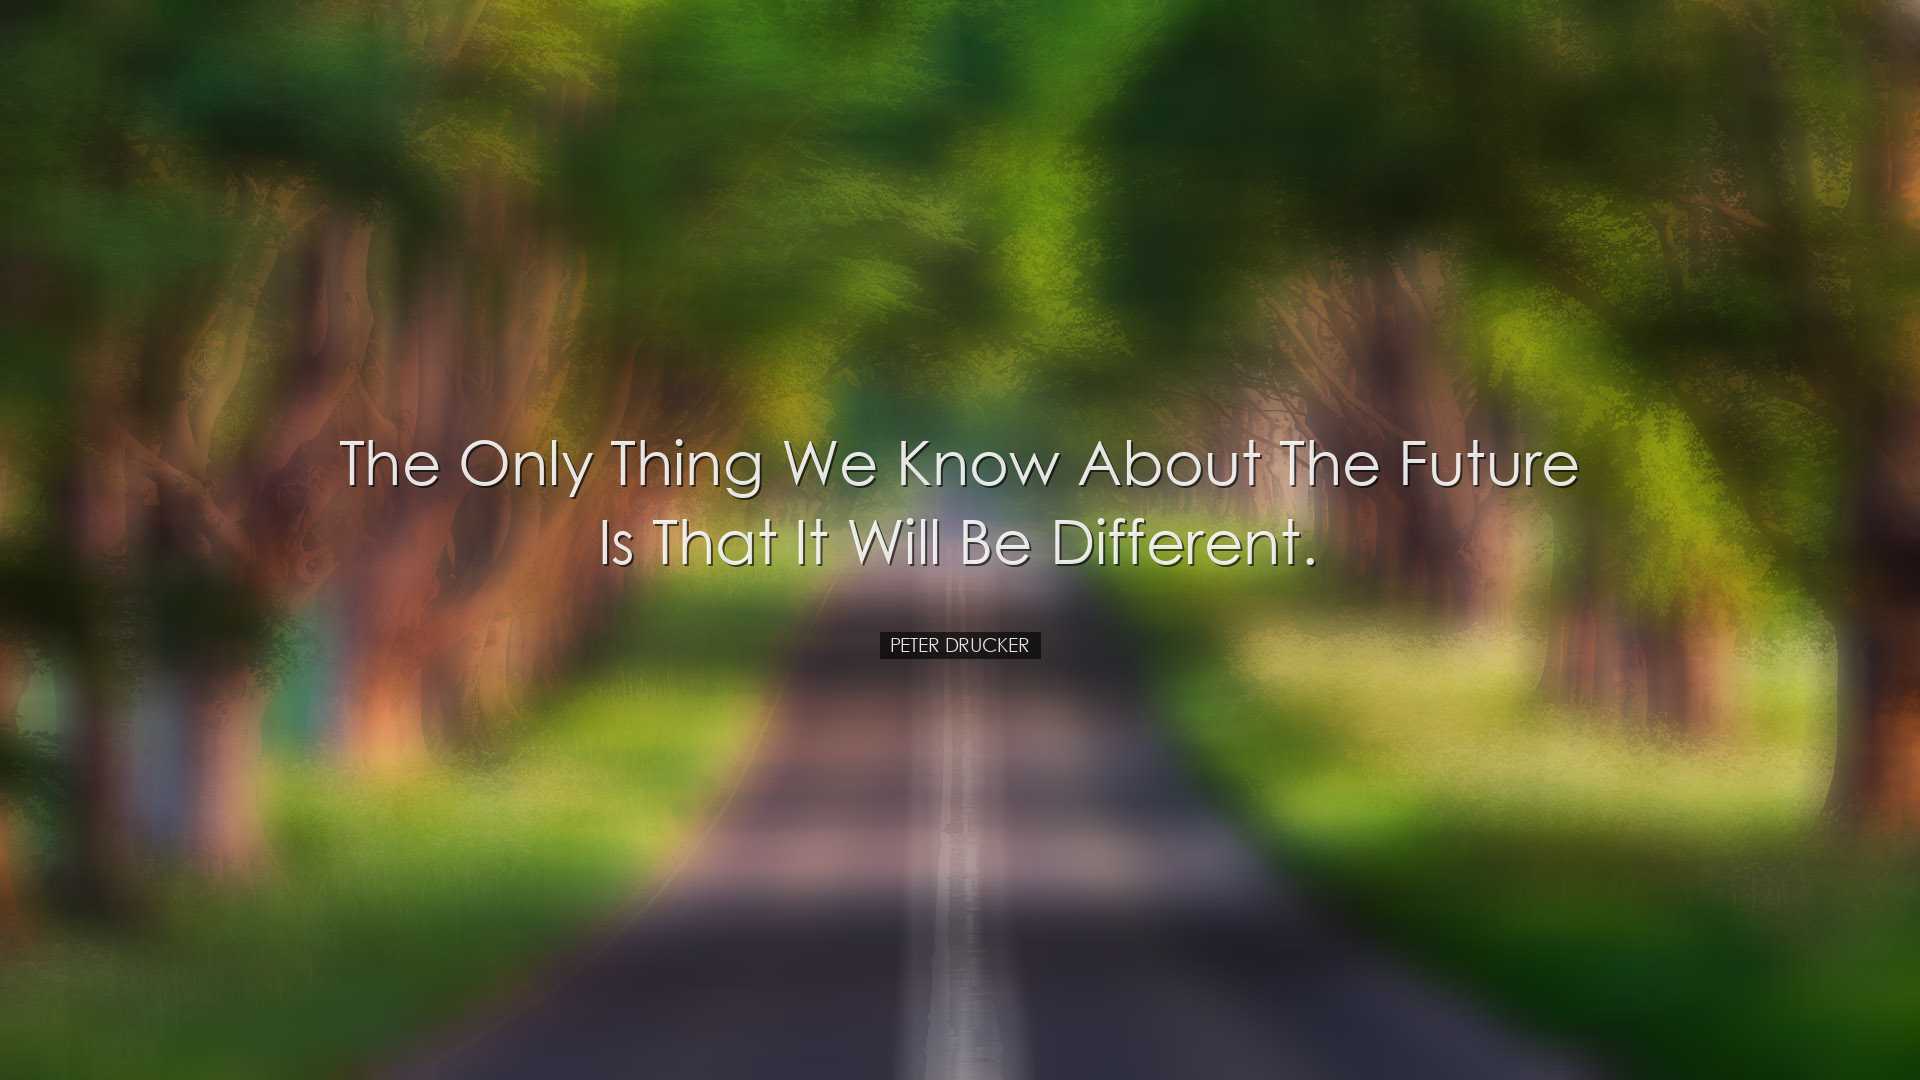 The only thing we know about the future is that it will be differe